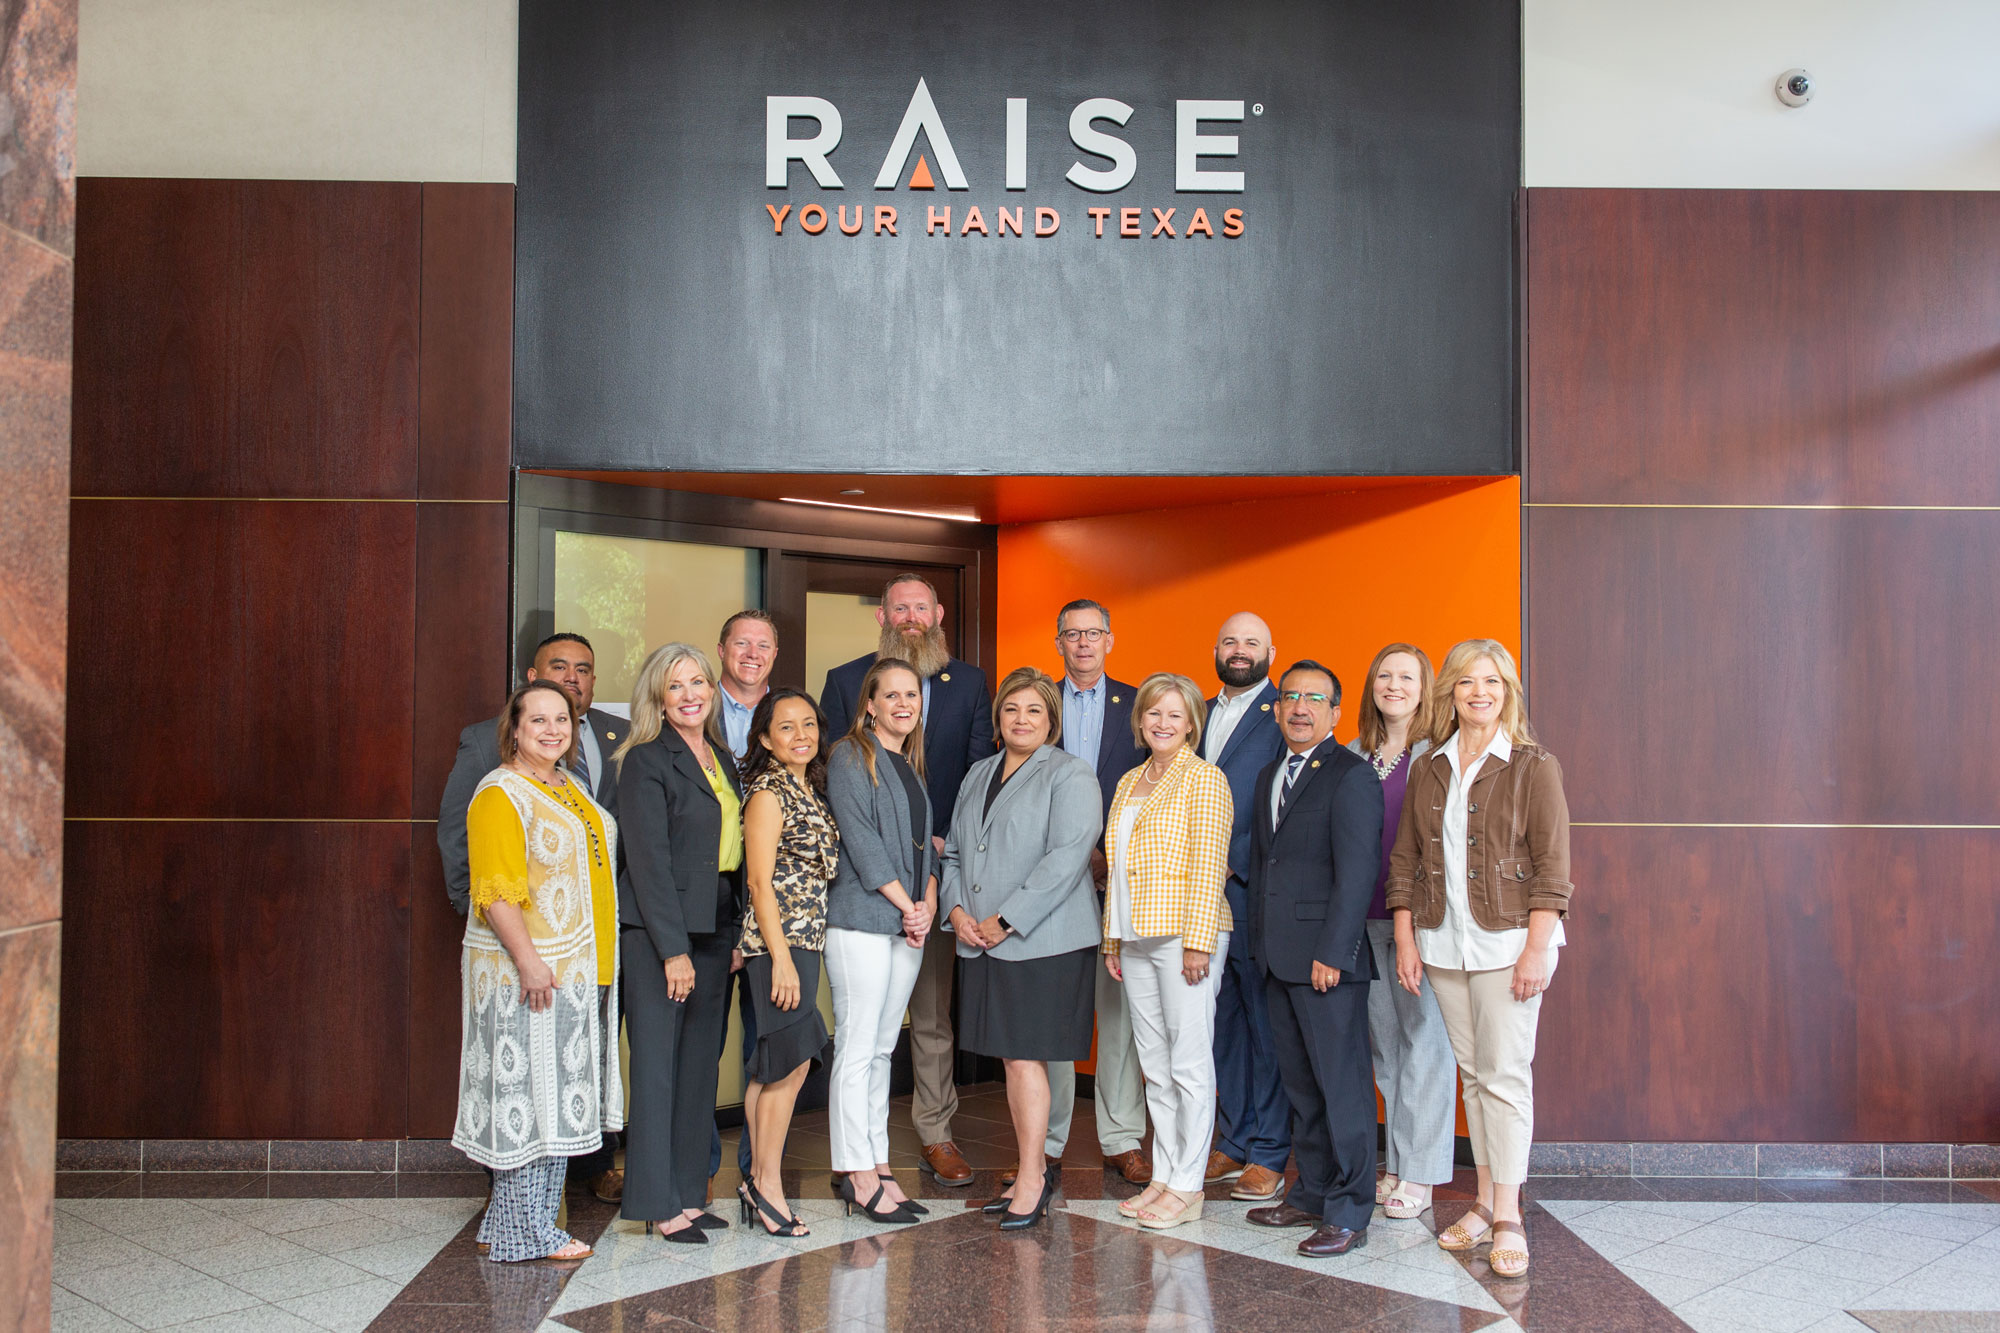 Regional Directors group shot outside of the old Raise Your Hand Texas entrance.